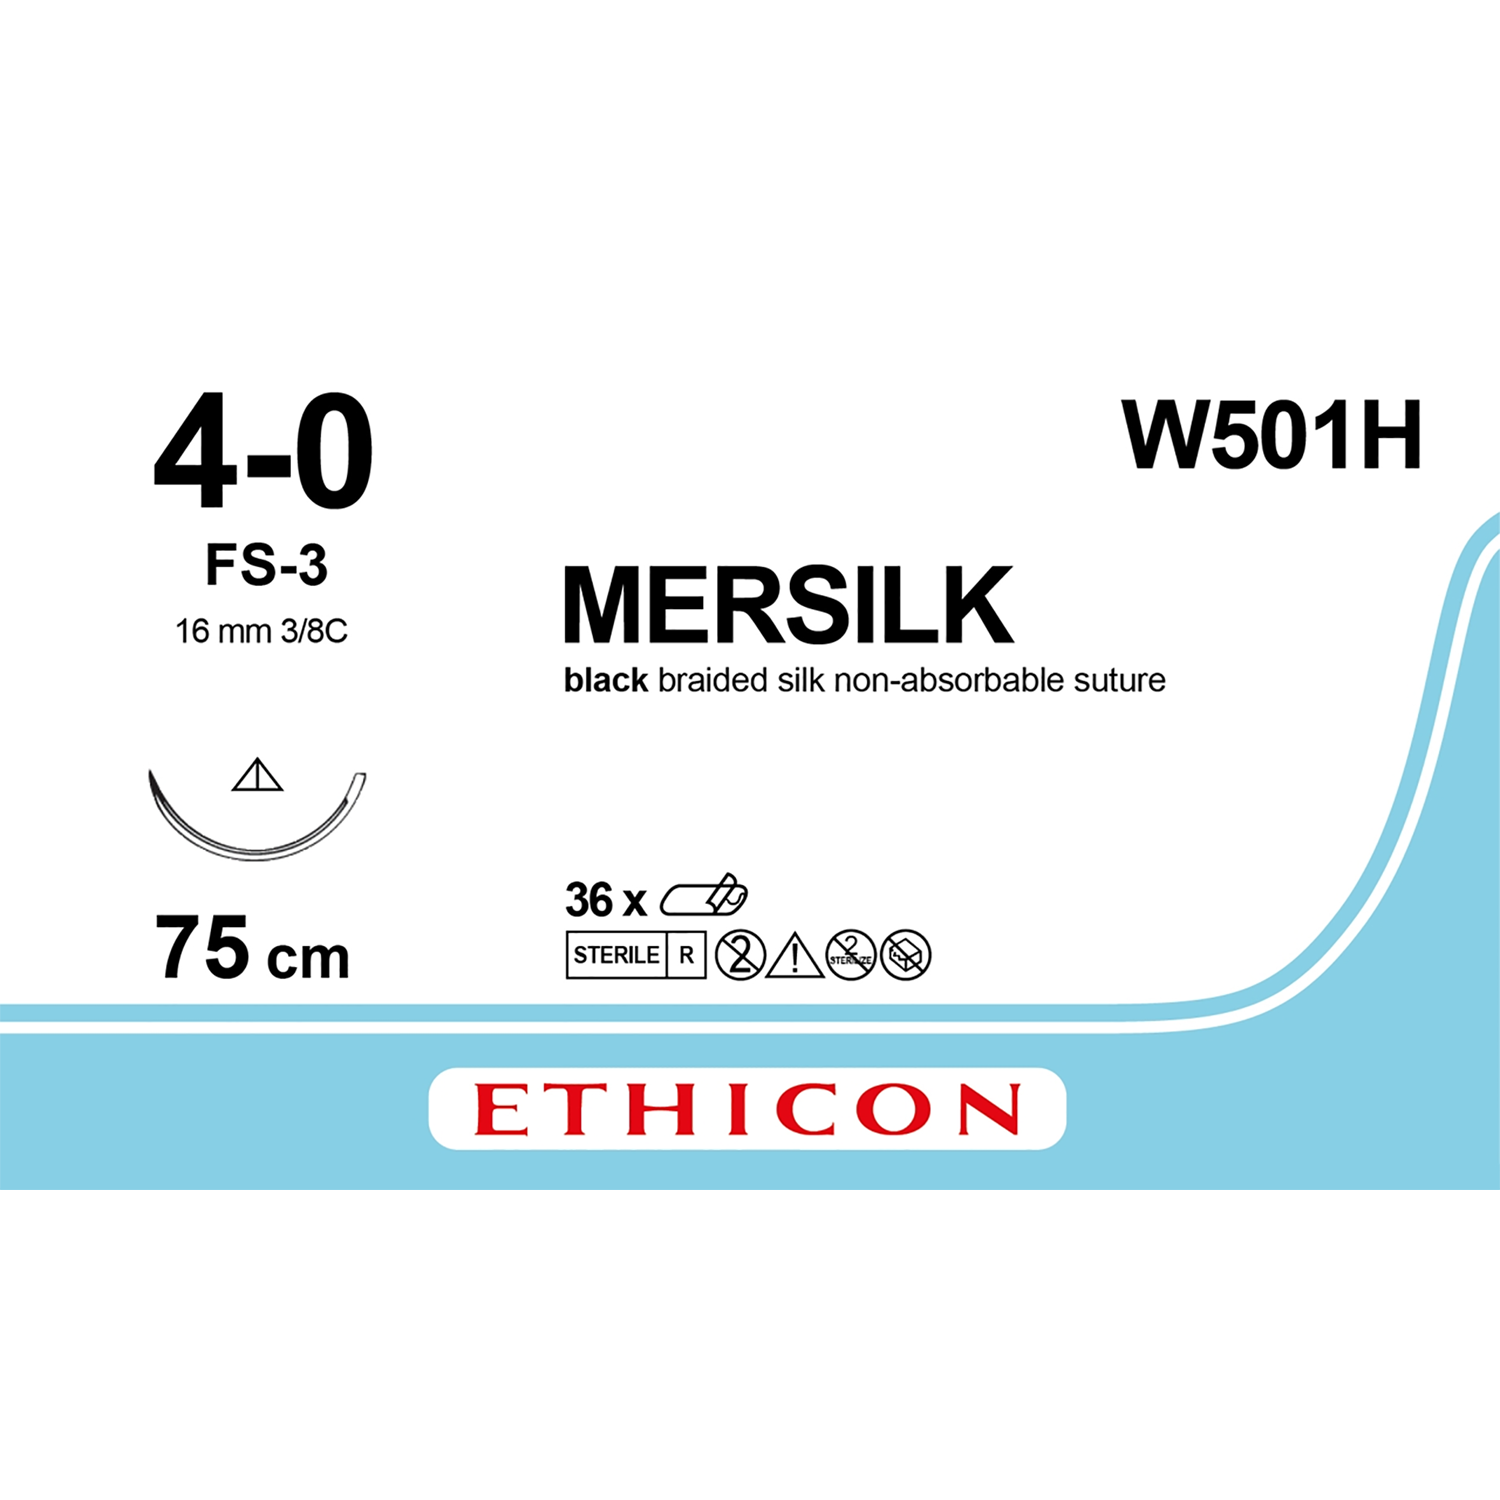 Ethicon Mersilk Suture | Non Absorbable | Black | Size: 4-0 | Length: 75cm | Needle: FS-3 | Pack of 36